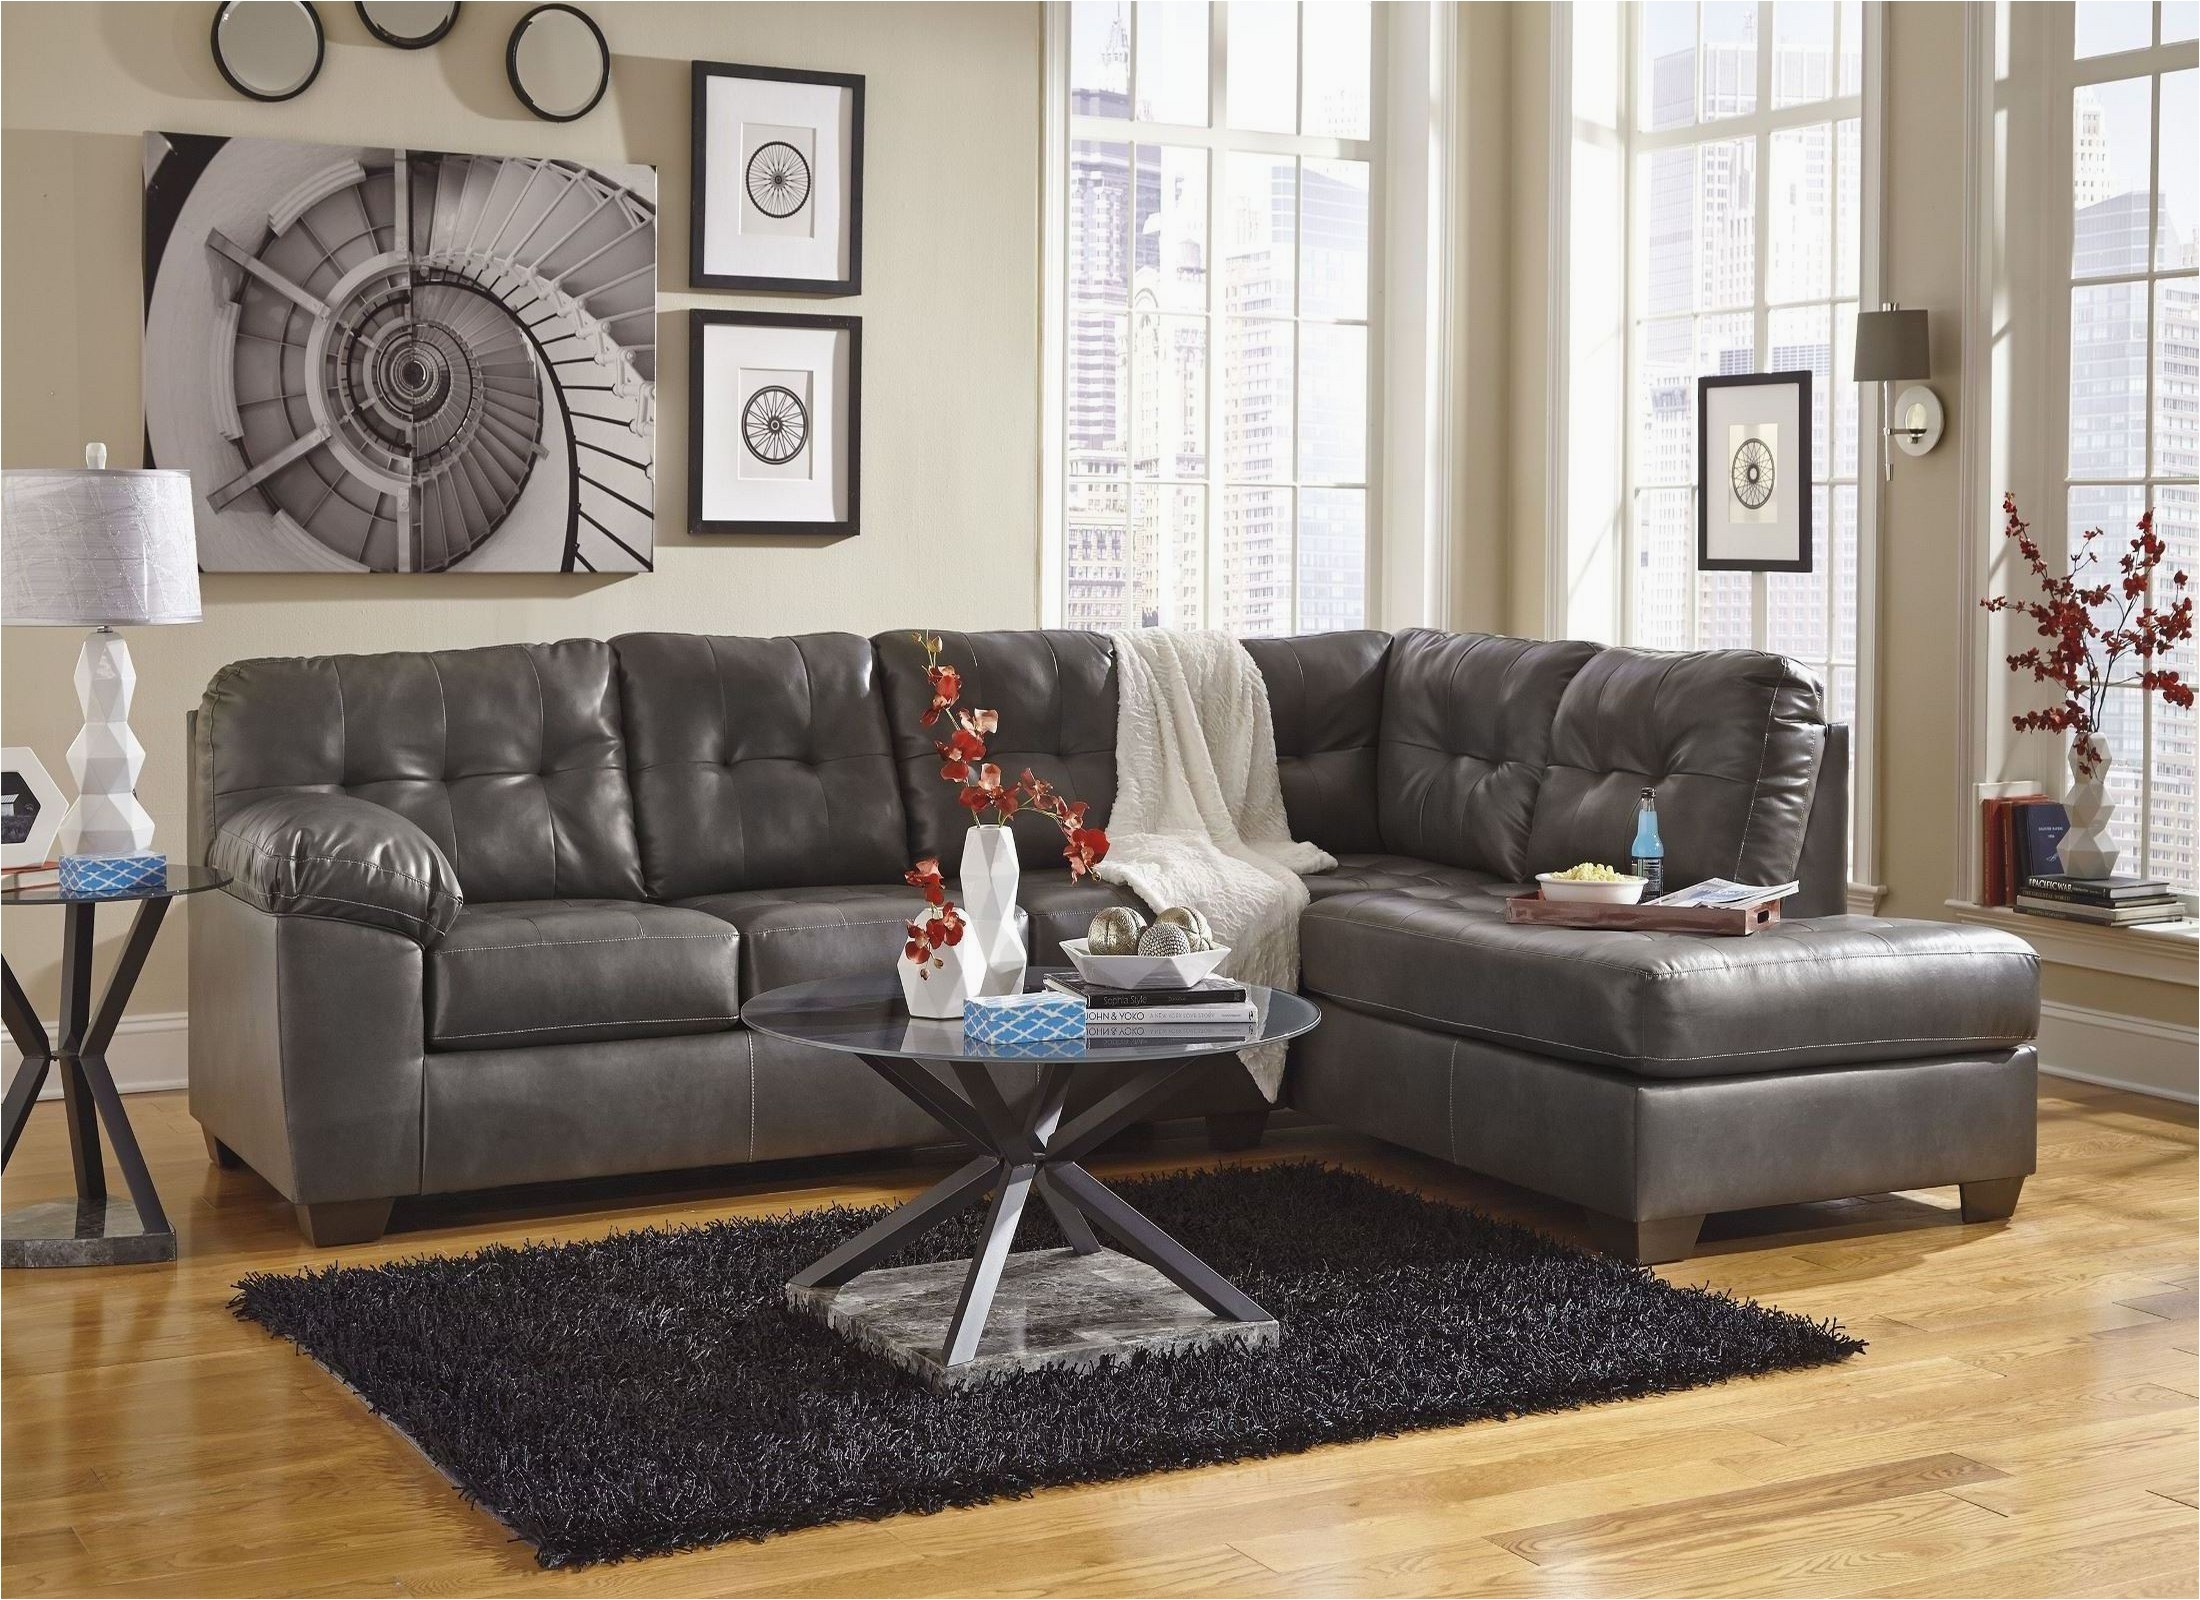 ashley furniture outlet nj inspirational alliston durablend gray raf sectional from ashley 17 66 photograph of